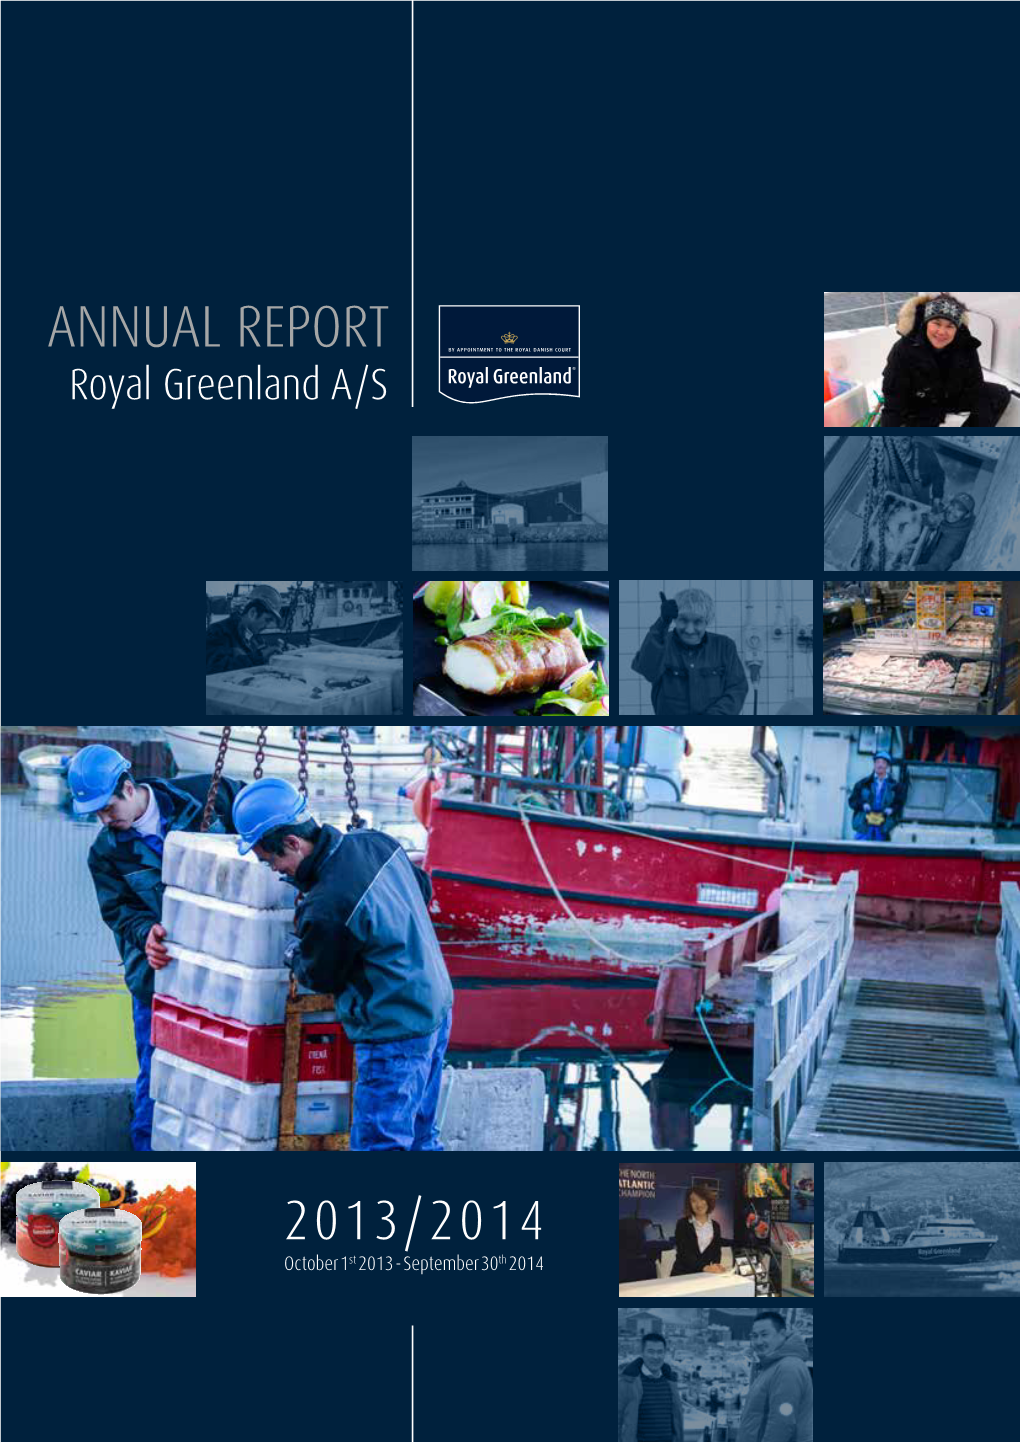 ANNUAL REPORT Royal Greenland A/S